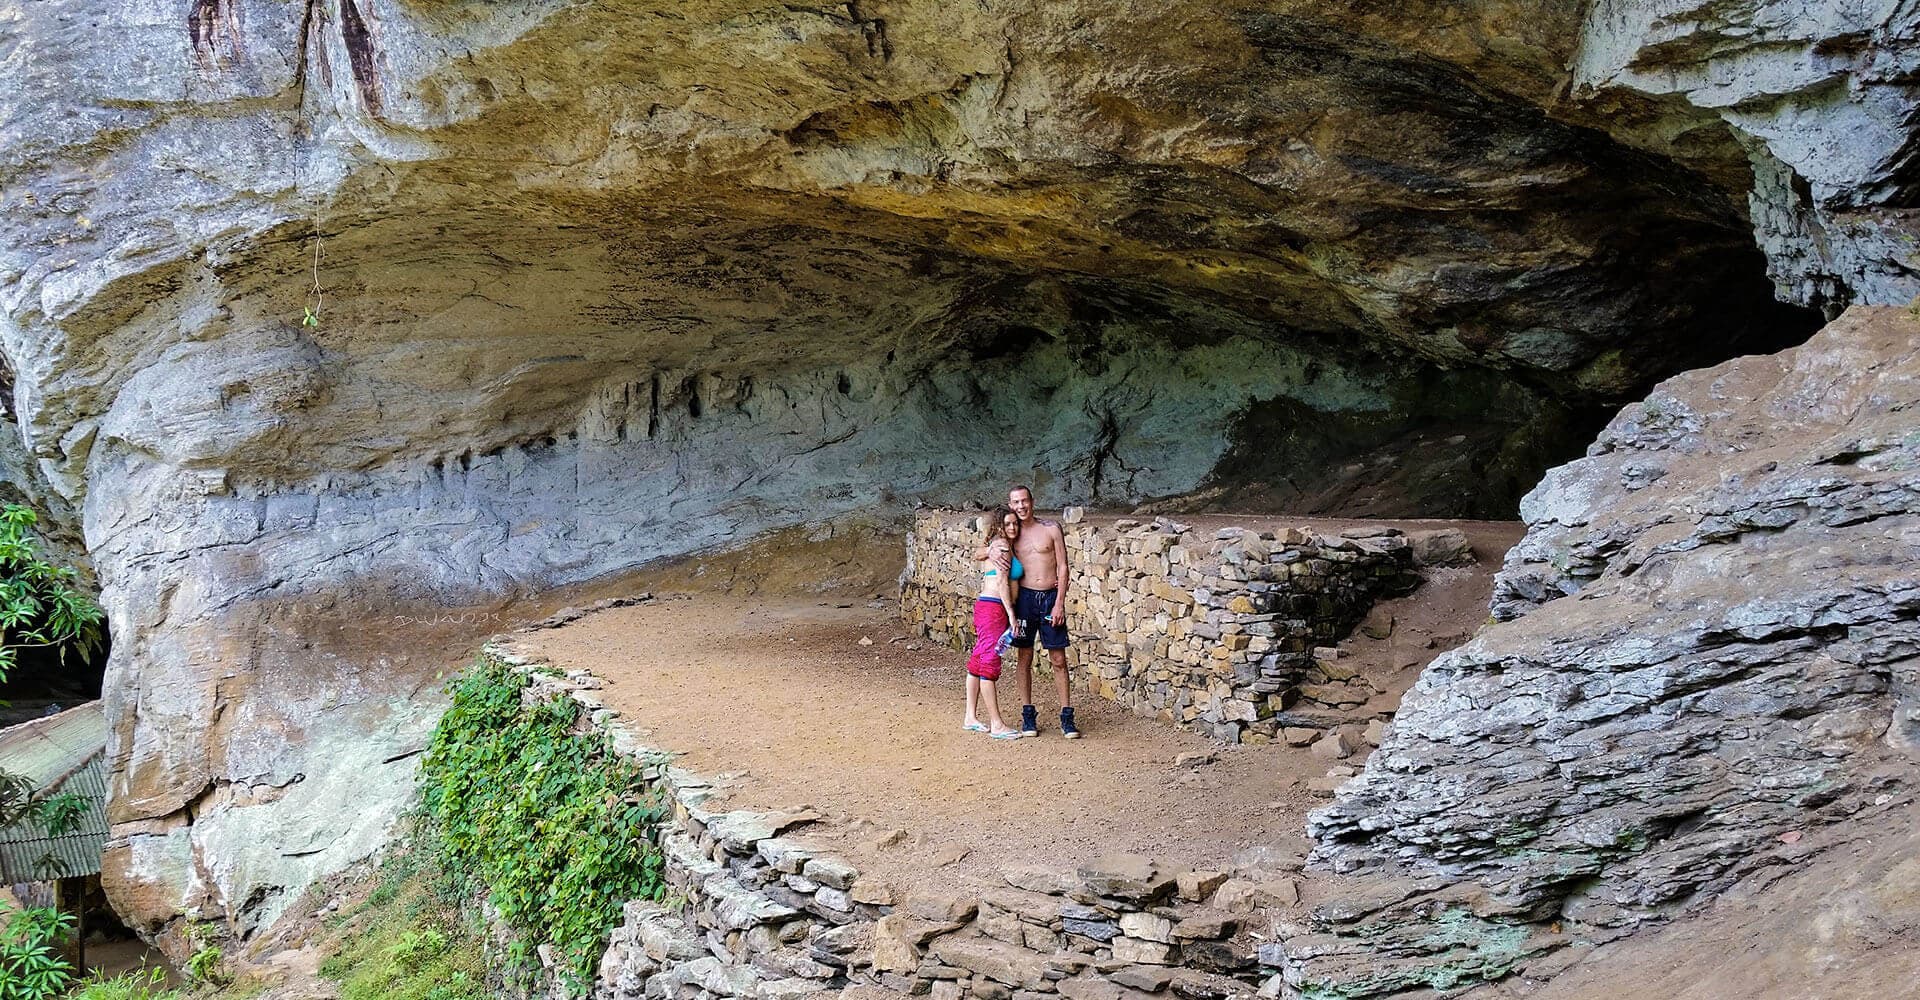 Front view of Beli Lena Cave and a tourist couple in Kithulgala Sri Lanka